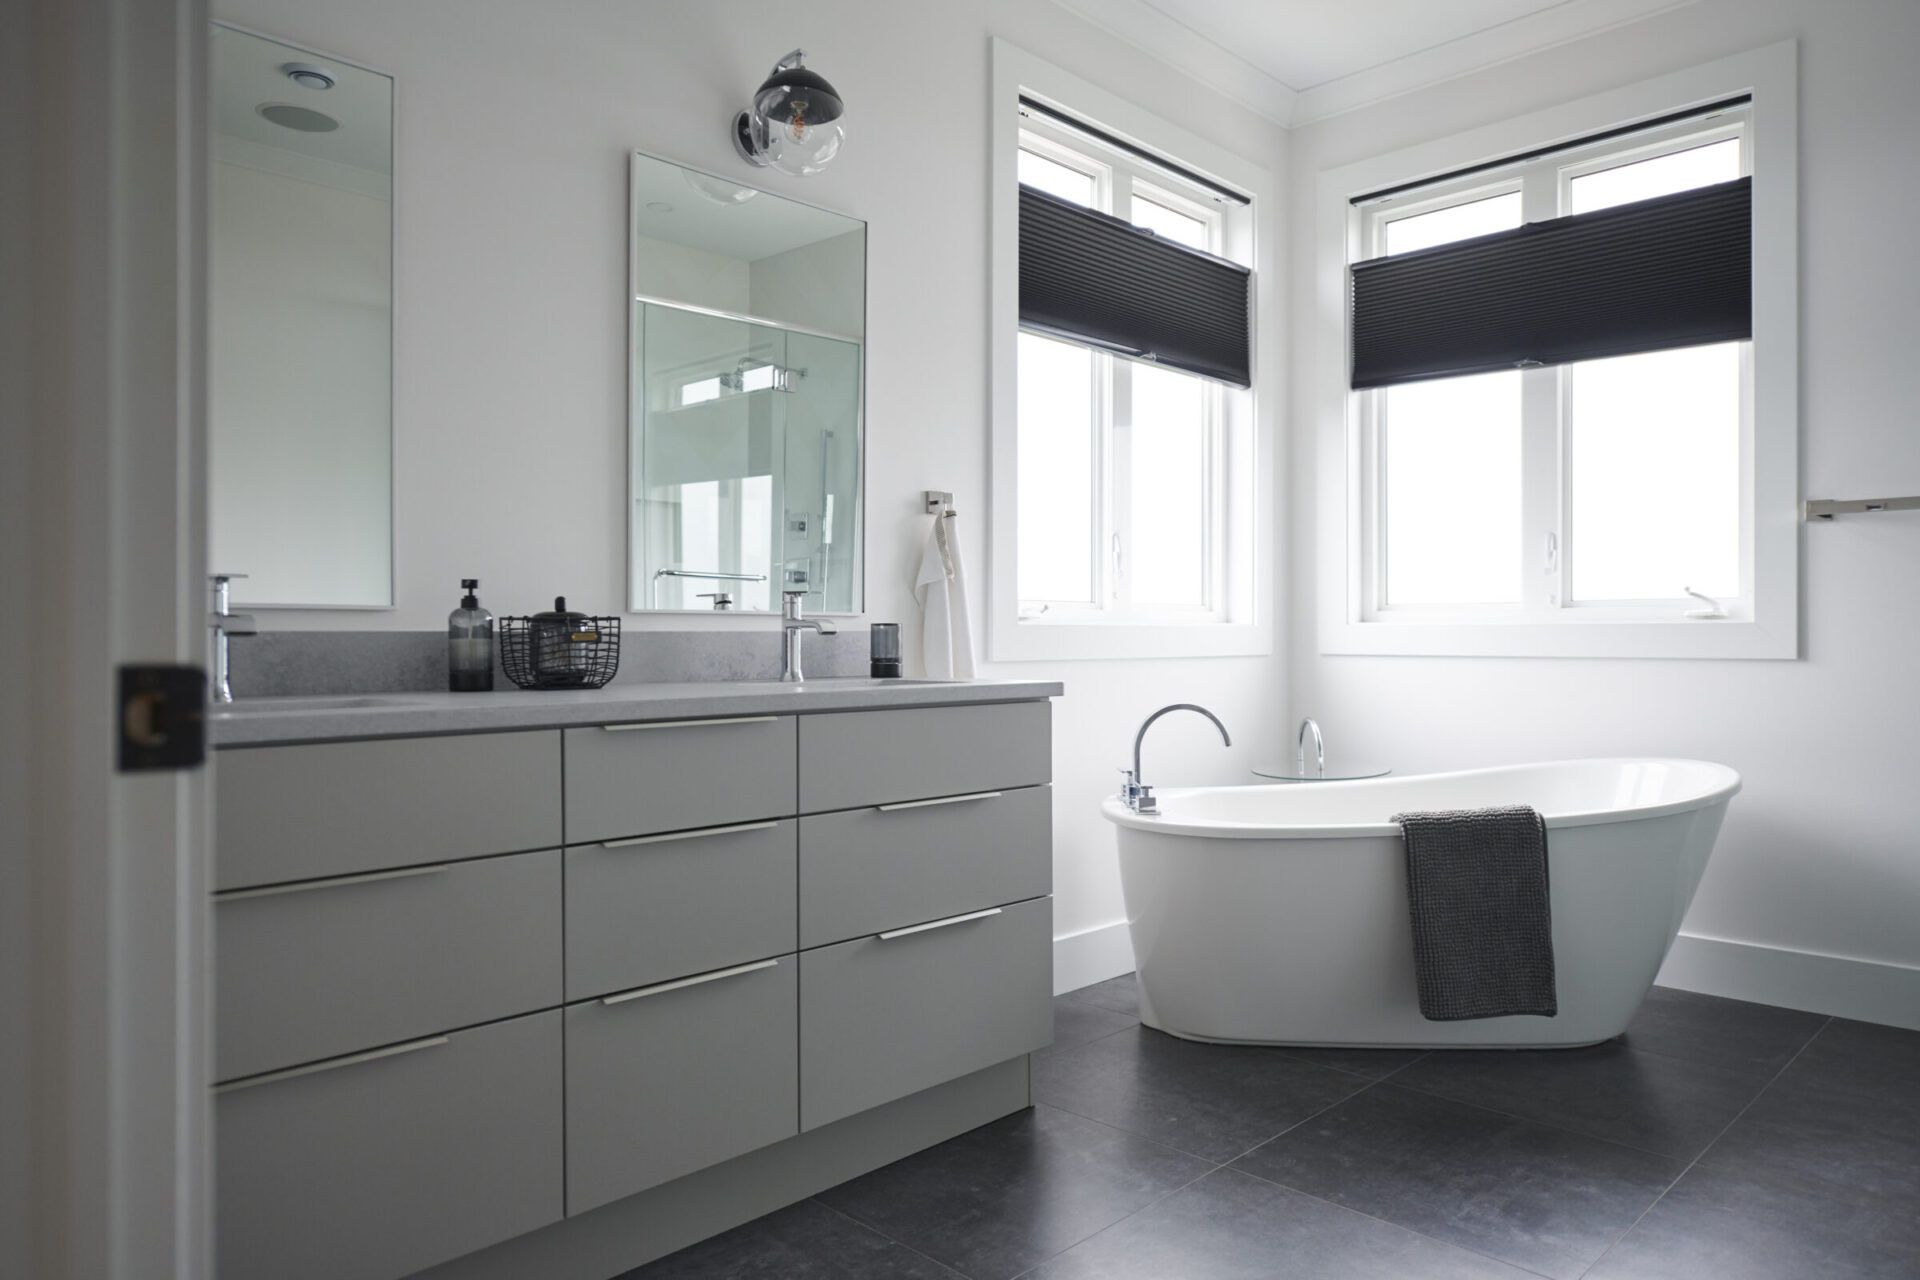 Modern bathroom interior with a large freestanding tub, double sink vanity, mirrors, and dark floor tiles. Natural light comes through two windows with blinds.